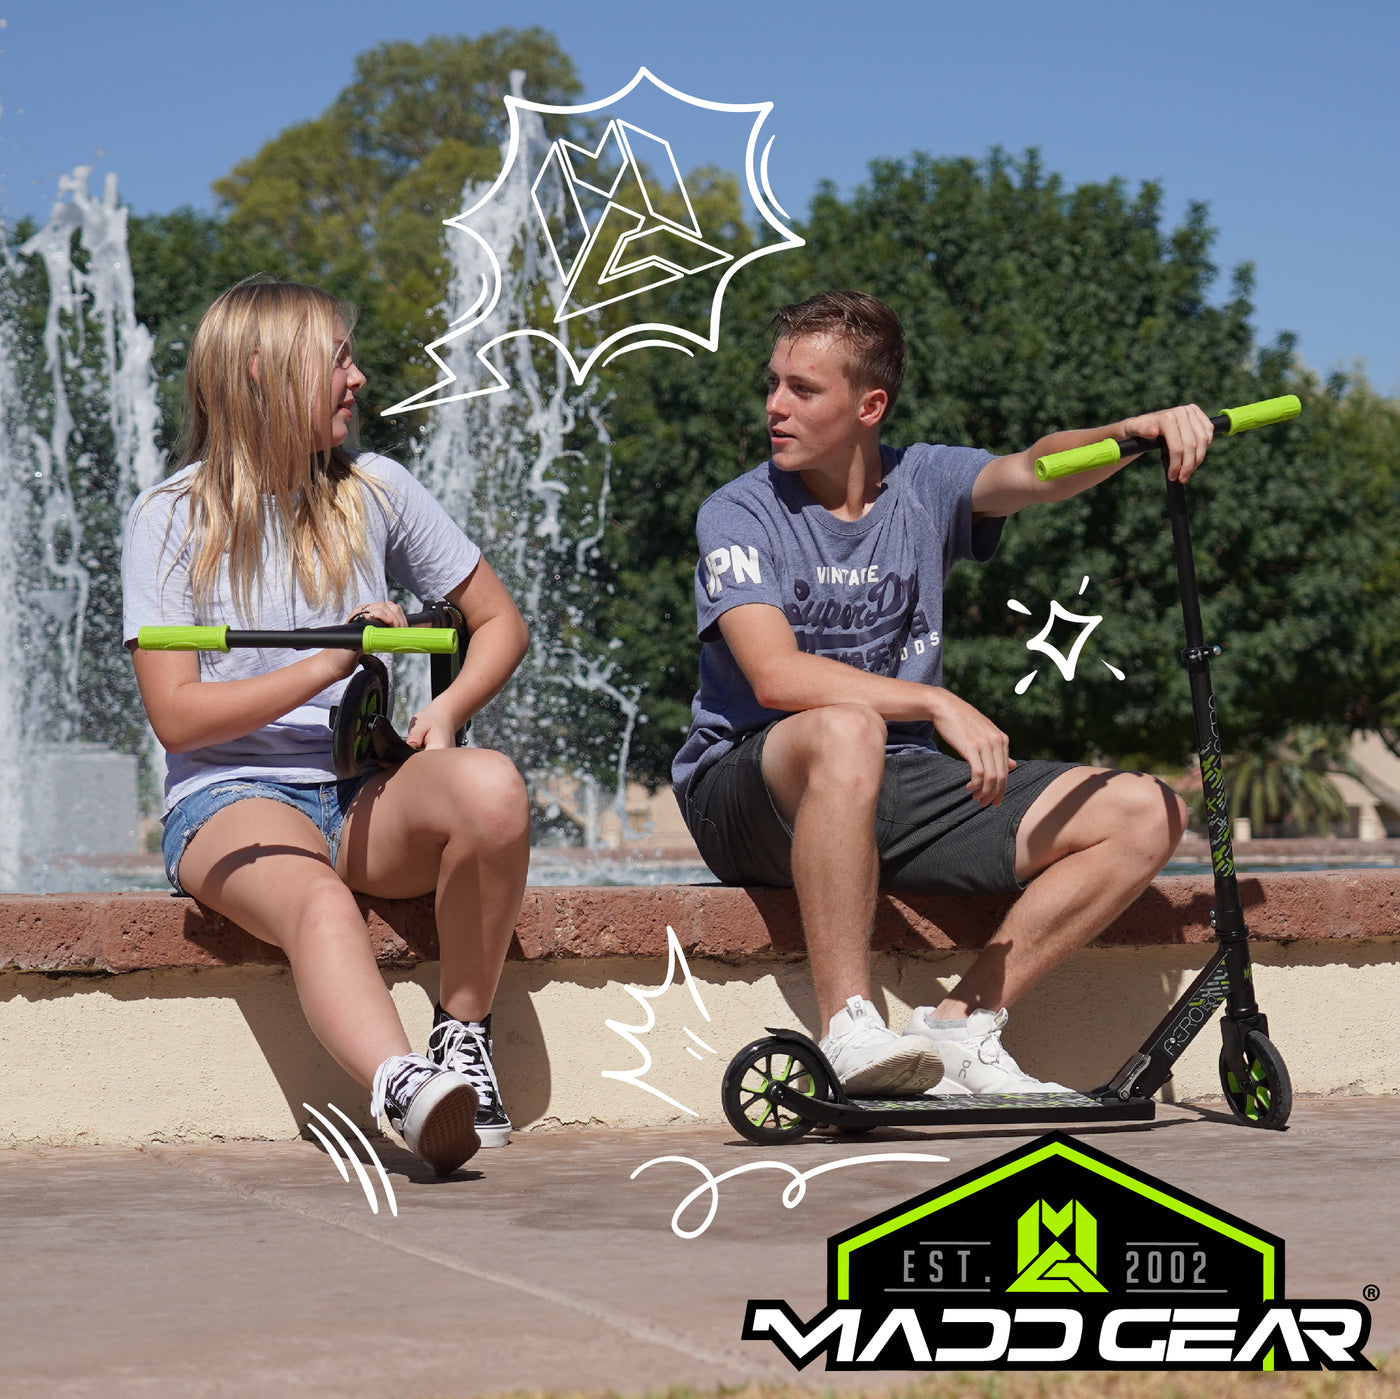 Madd Gear Collapsible Fold-Up Aero 150 Scooter Green Black Kids Teens Adults